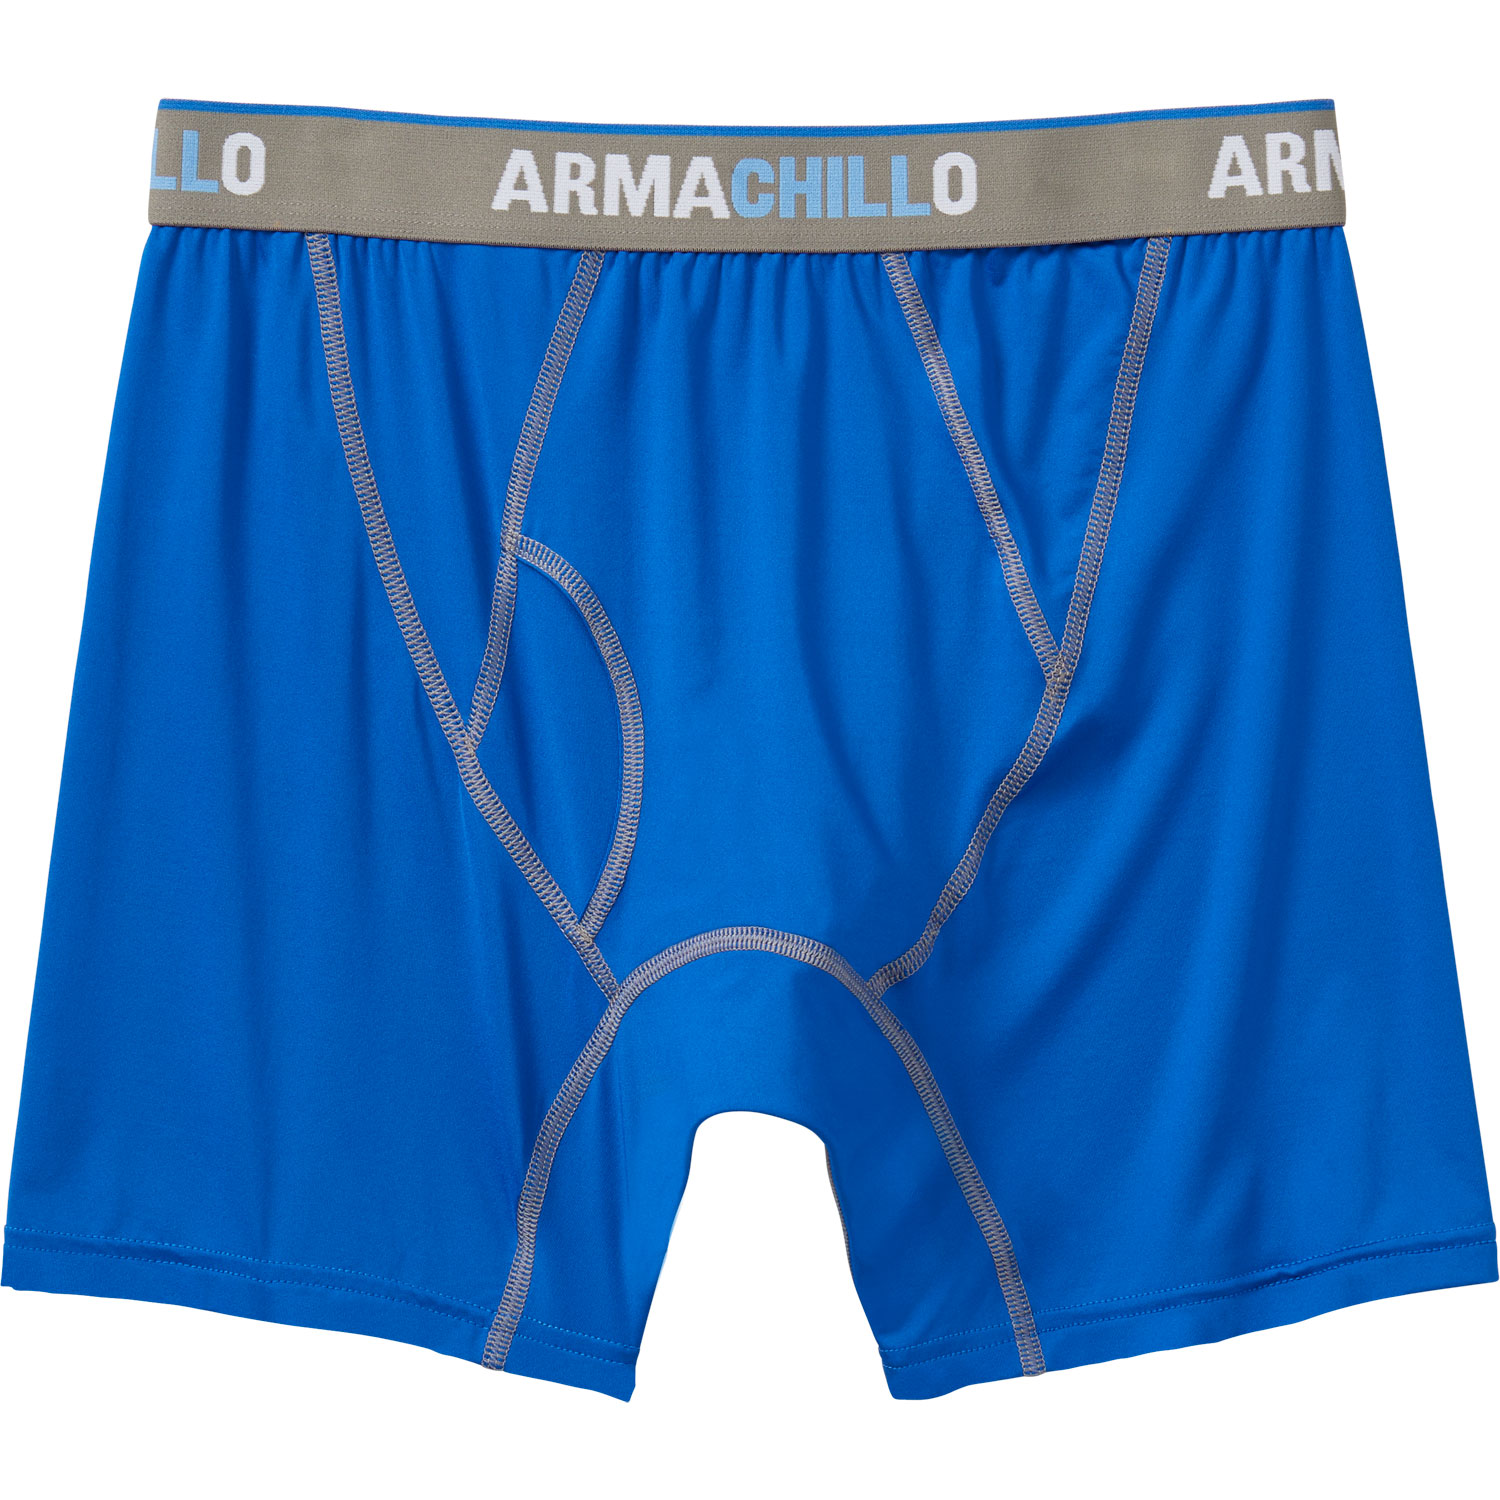 Duluth Trading Co Mens Armachillo Cooling Briefs in Lagoon 15274 